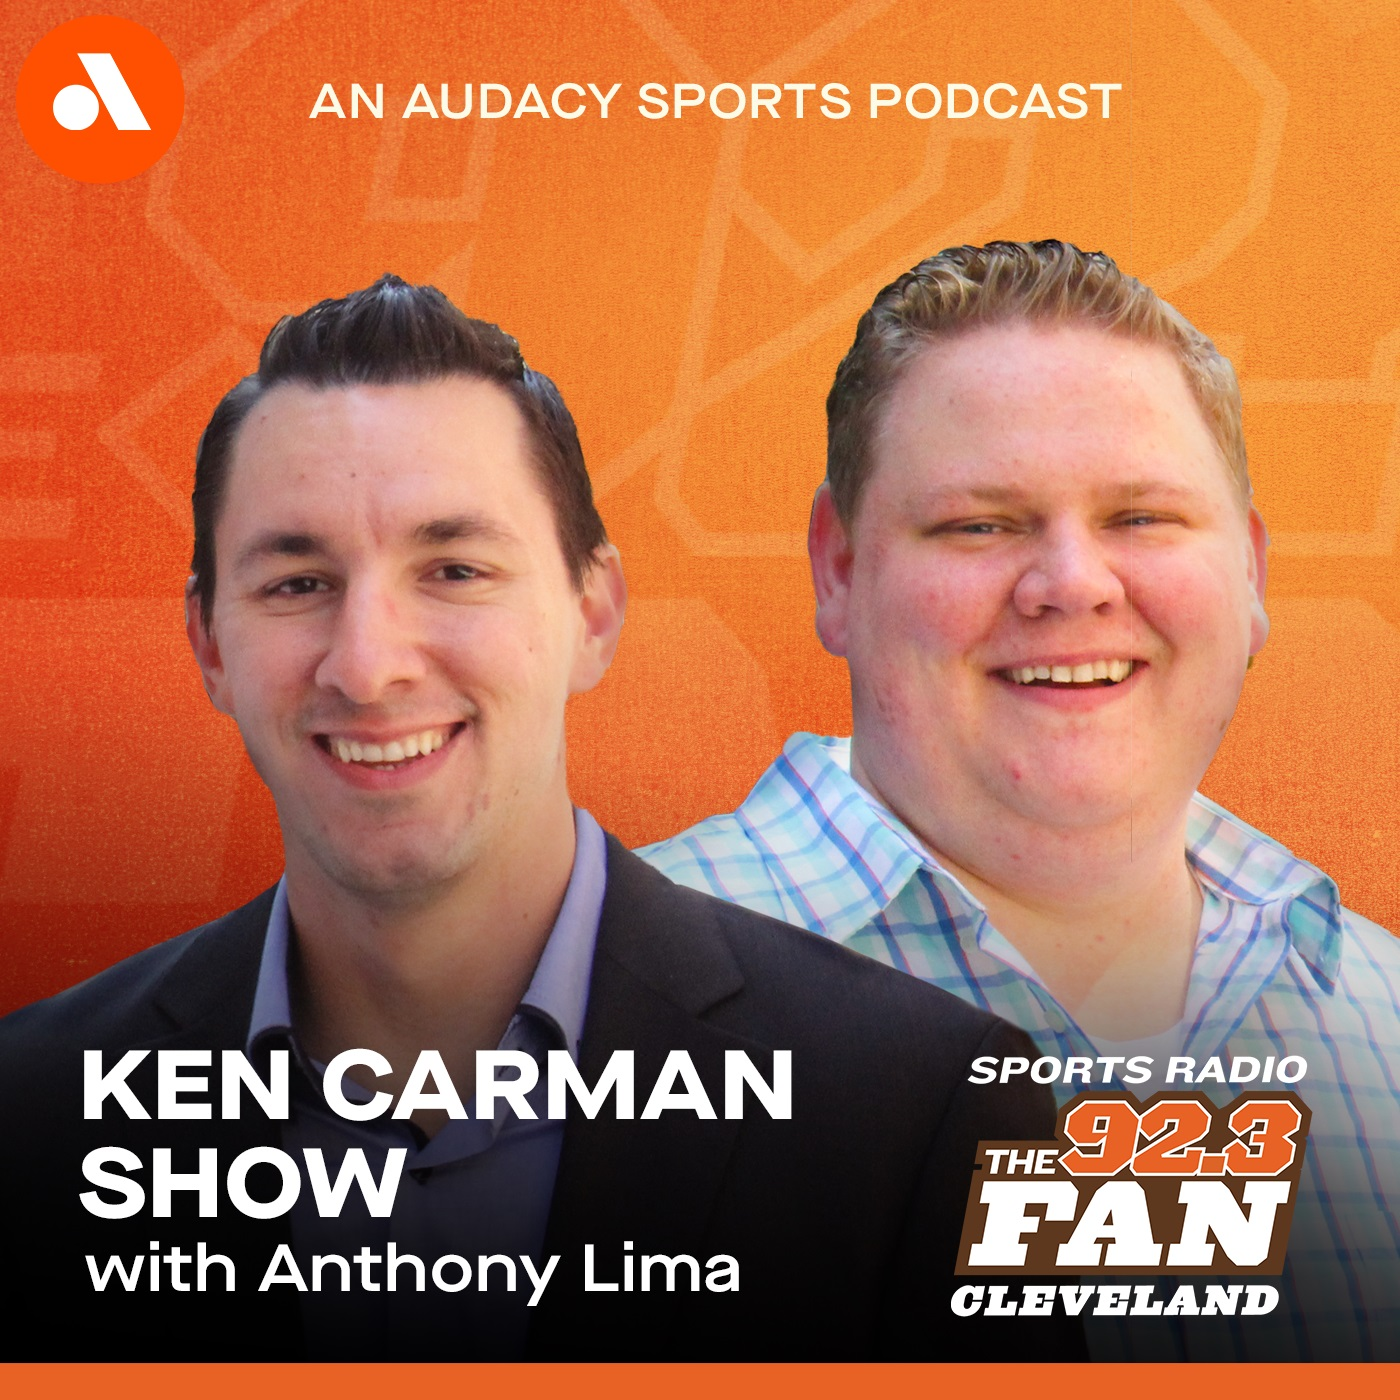 Hour 3: Lloyd cont'd + Daryl Ruiter + More heat on Koby Altman?